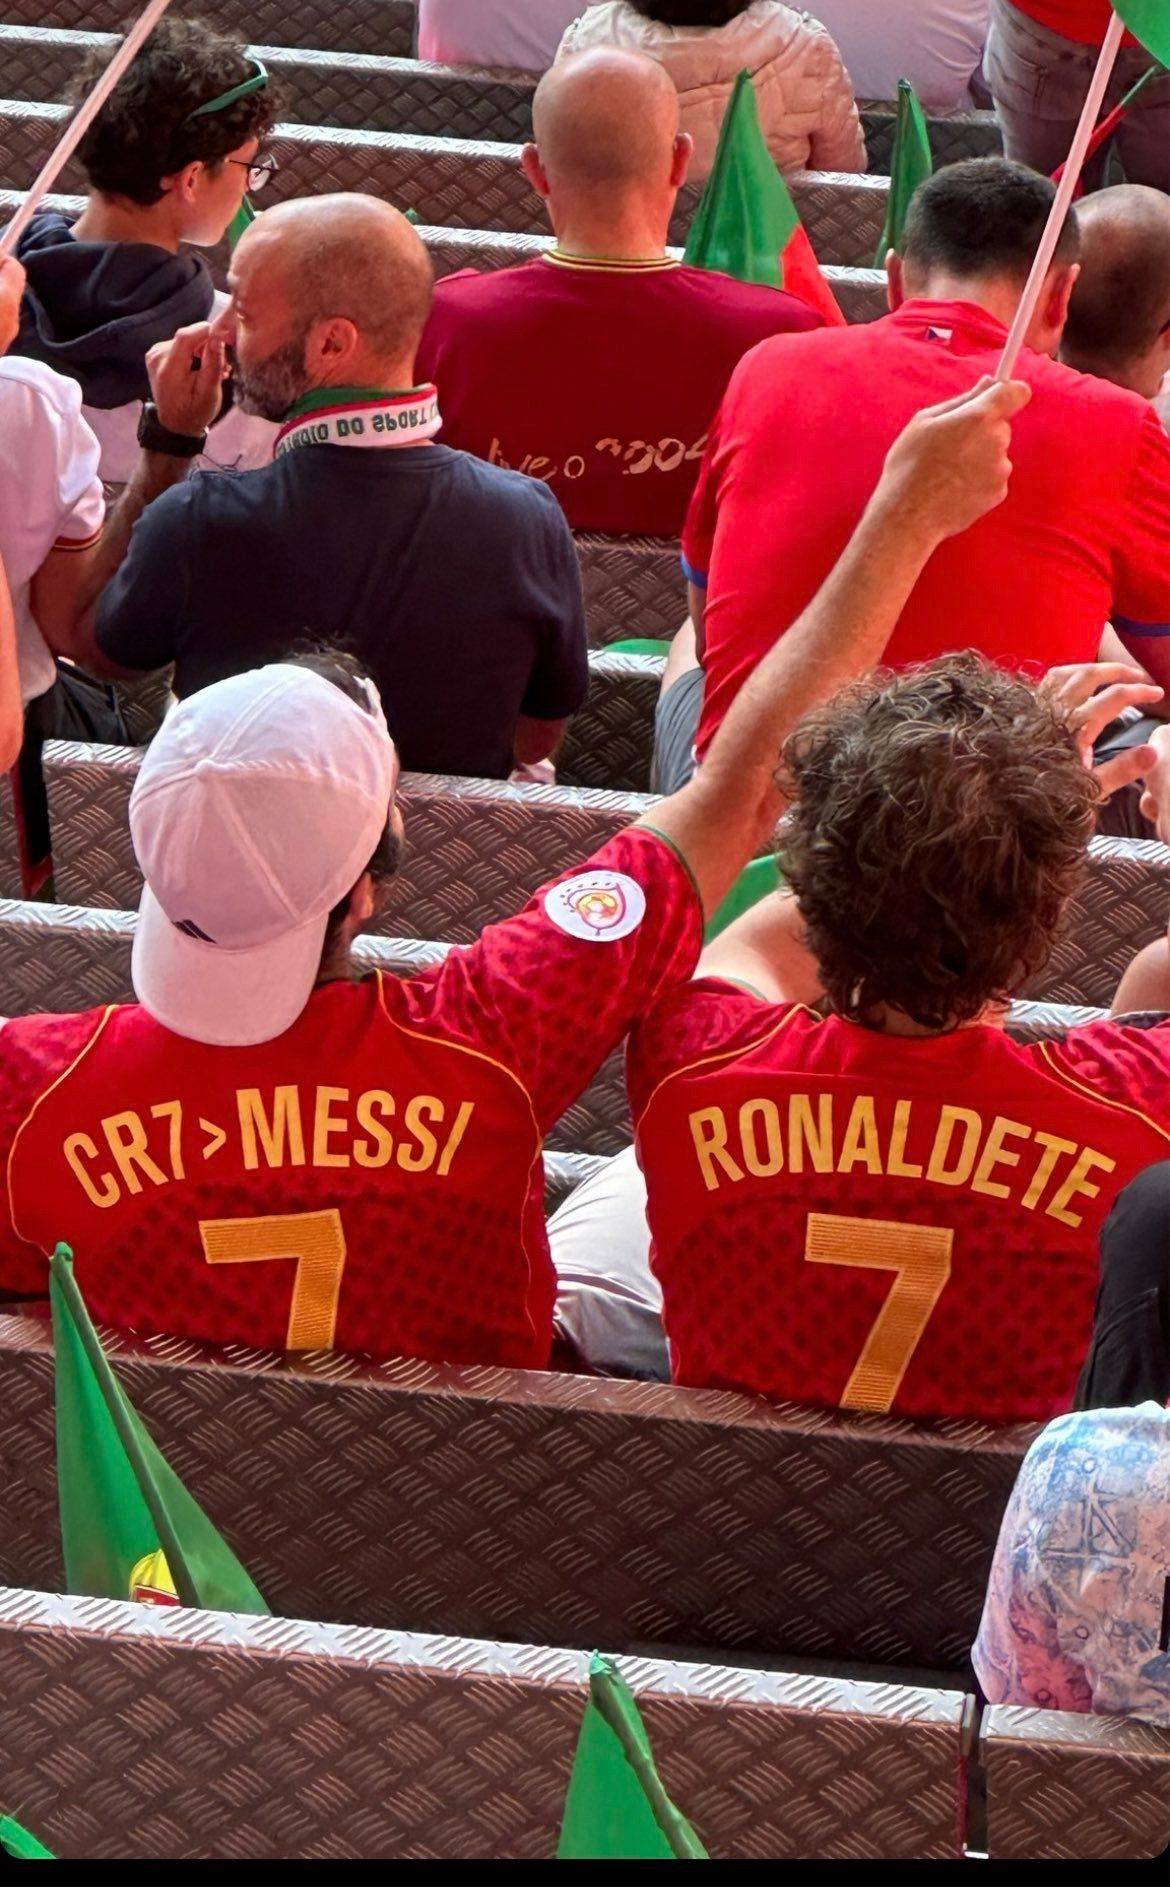 CR_MESSI? Portuguese Fans Make Their Stand at the Euros, Longing for the Ultimate Duo